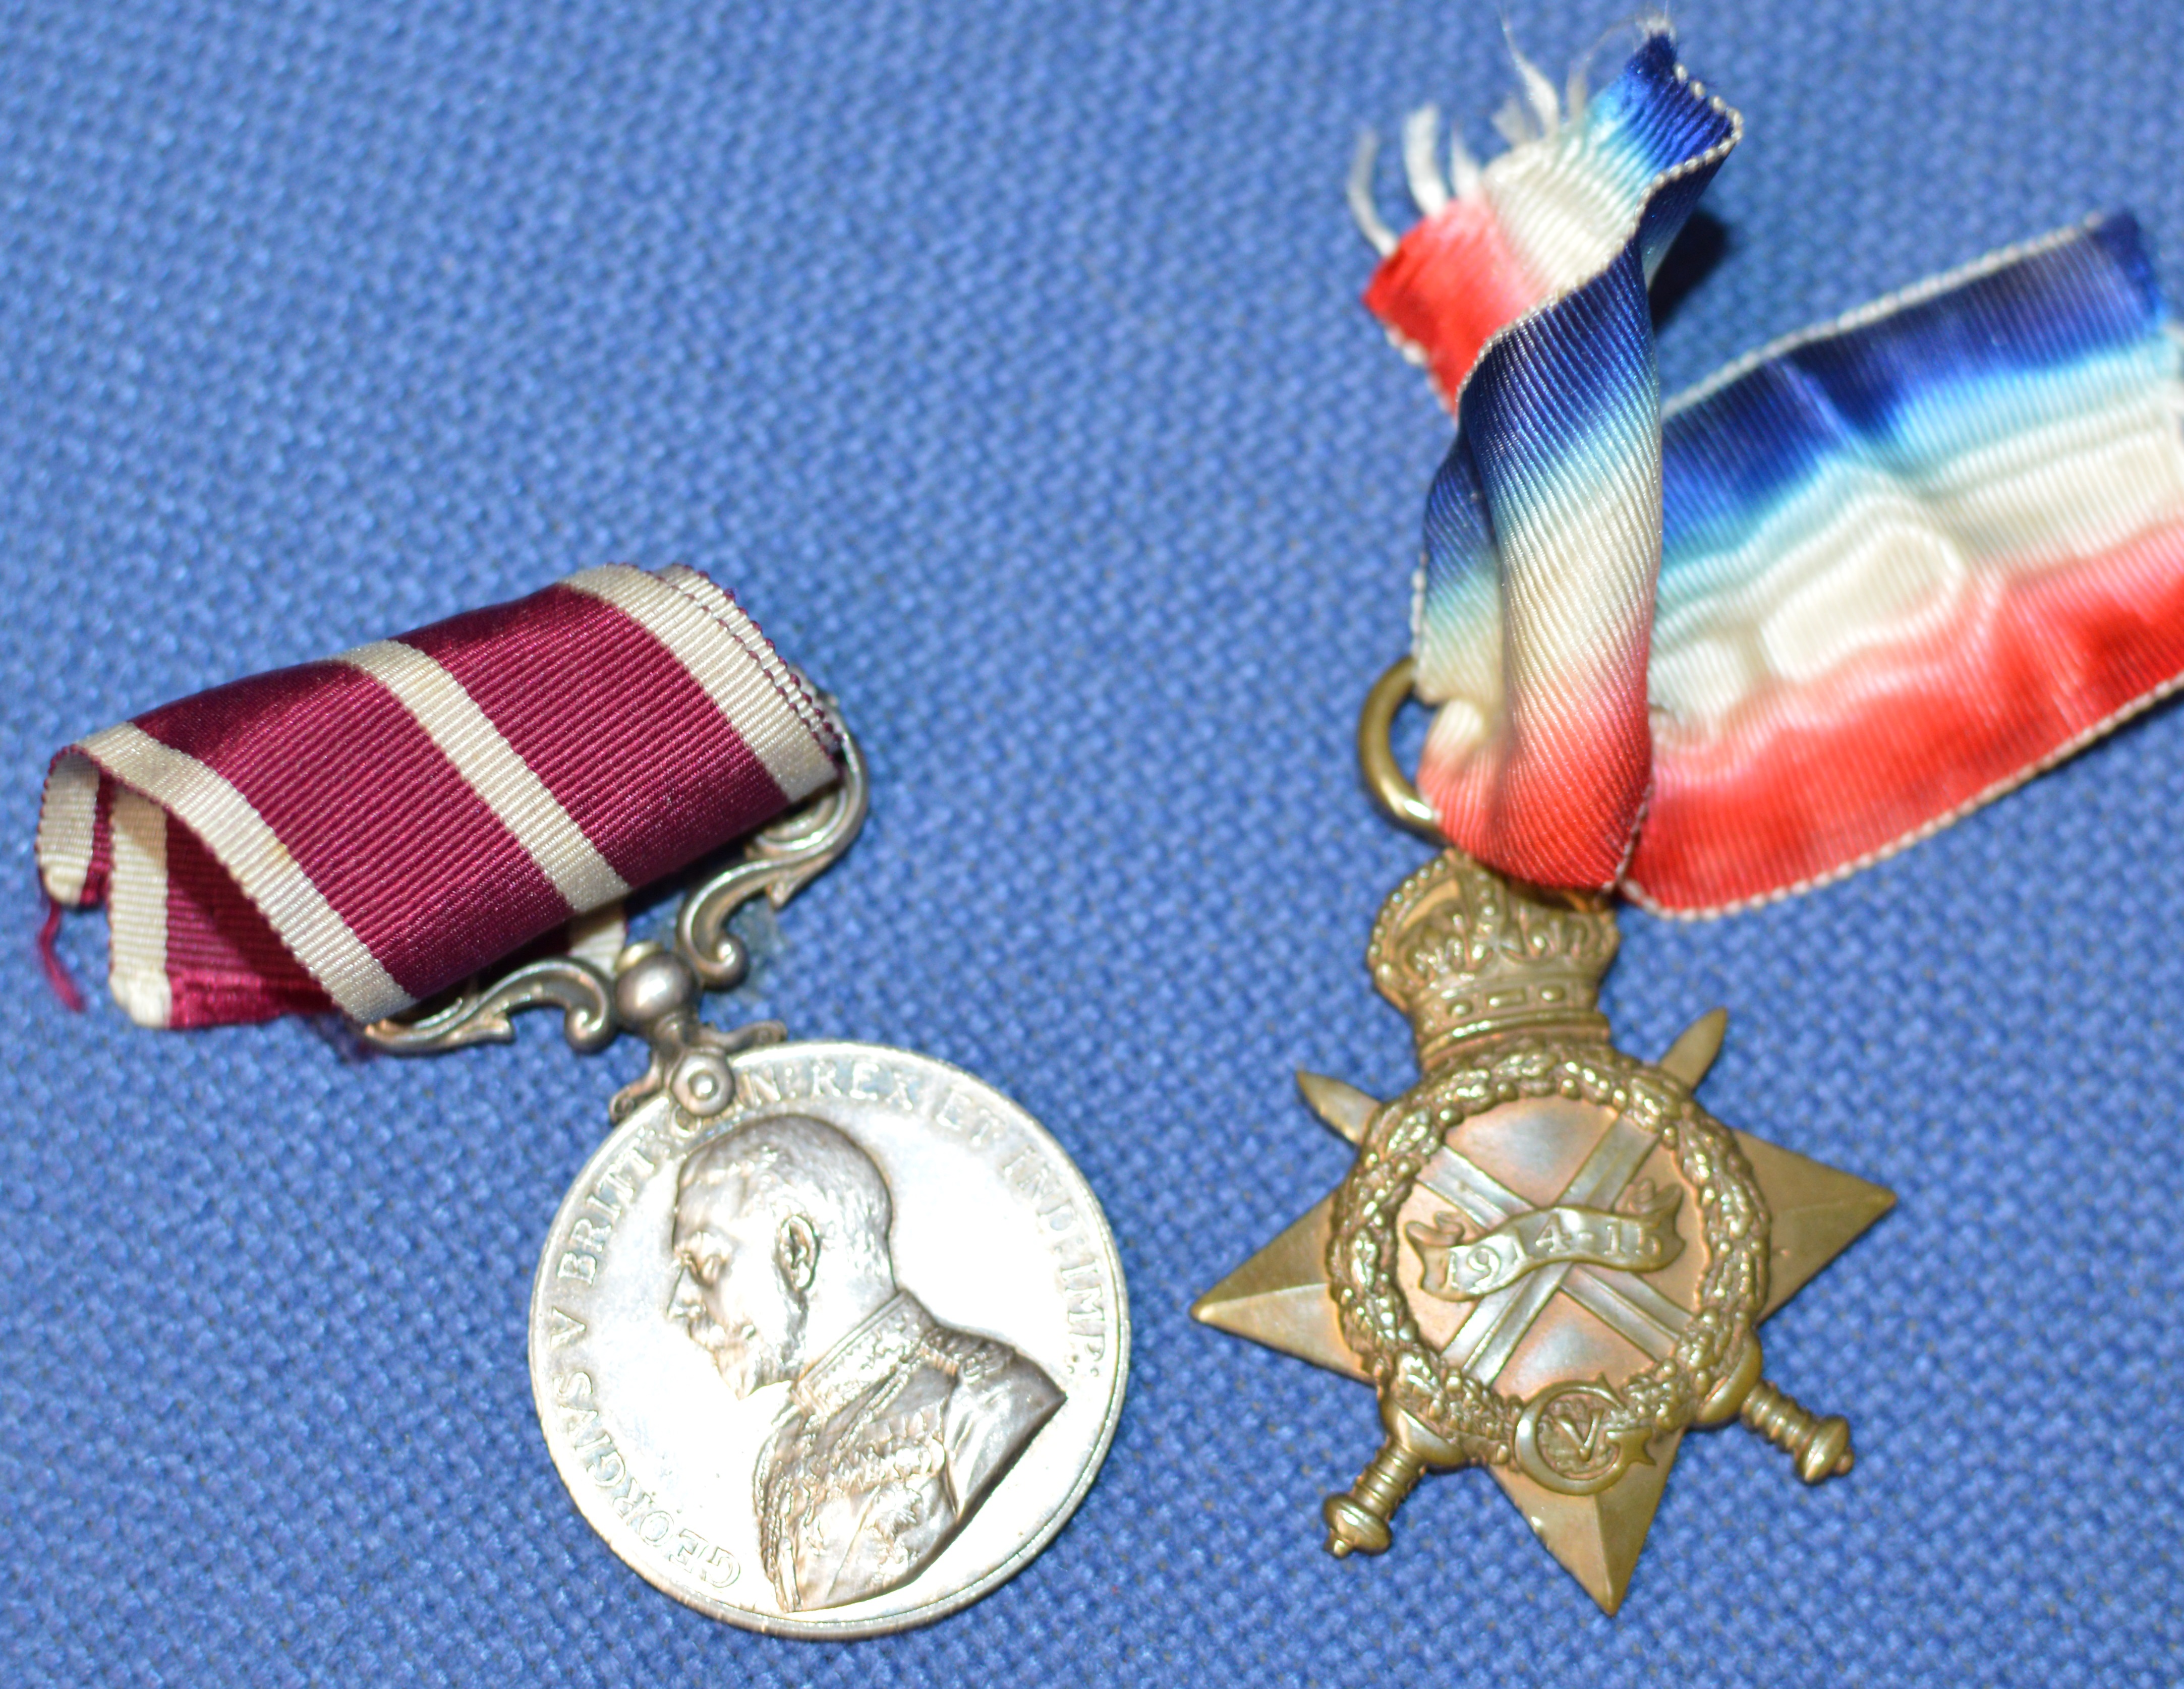 WORLD WAR 1 MEDAL DUO WITH MERITORIOUS SERVICE MEDAL AWARDED TO 200701 SJT A. WEBSTER